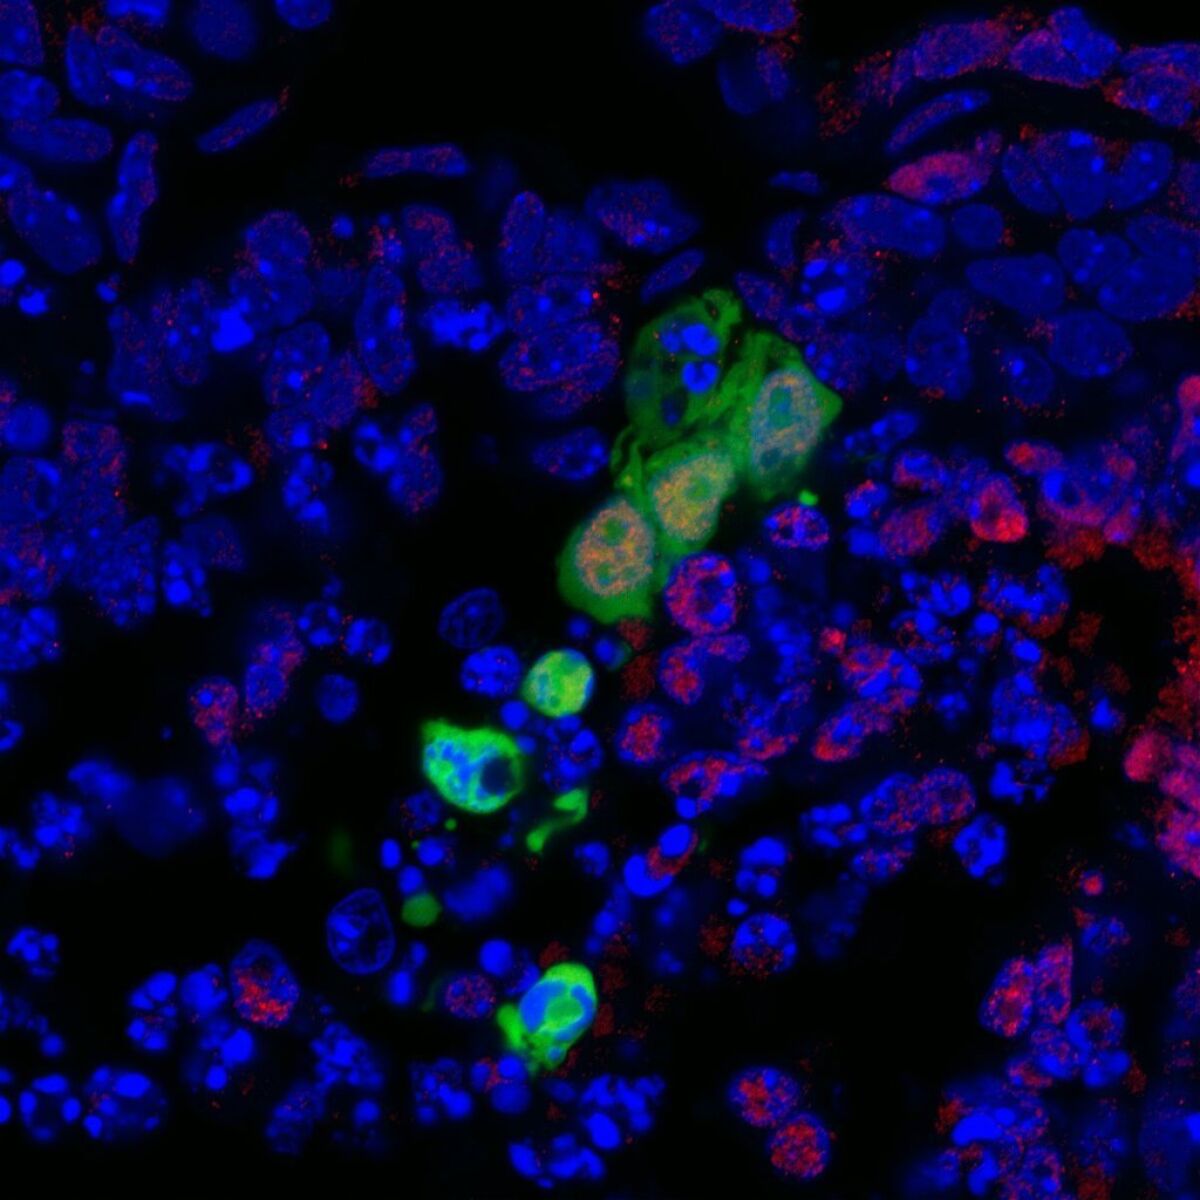 A newly discovered type of human stem cells is shown in green integrating and developing into the surrounding cells of a nonviable mouse embryo. Red indicates cells of endoderm lineage. Endoderm cells can give rise to tissue that covers organs from the digestive and respiratory systems. The new stem cells, developed at the Salk Institute, holds promise for one day growing replacement functional cells and tissues.